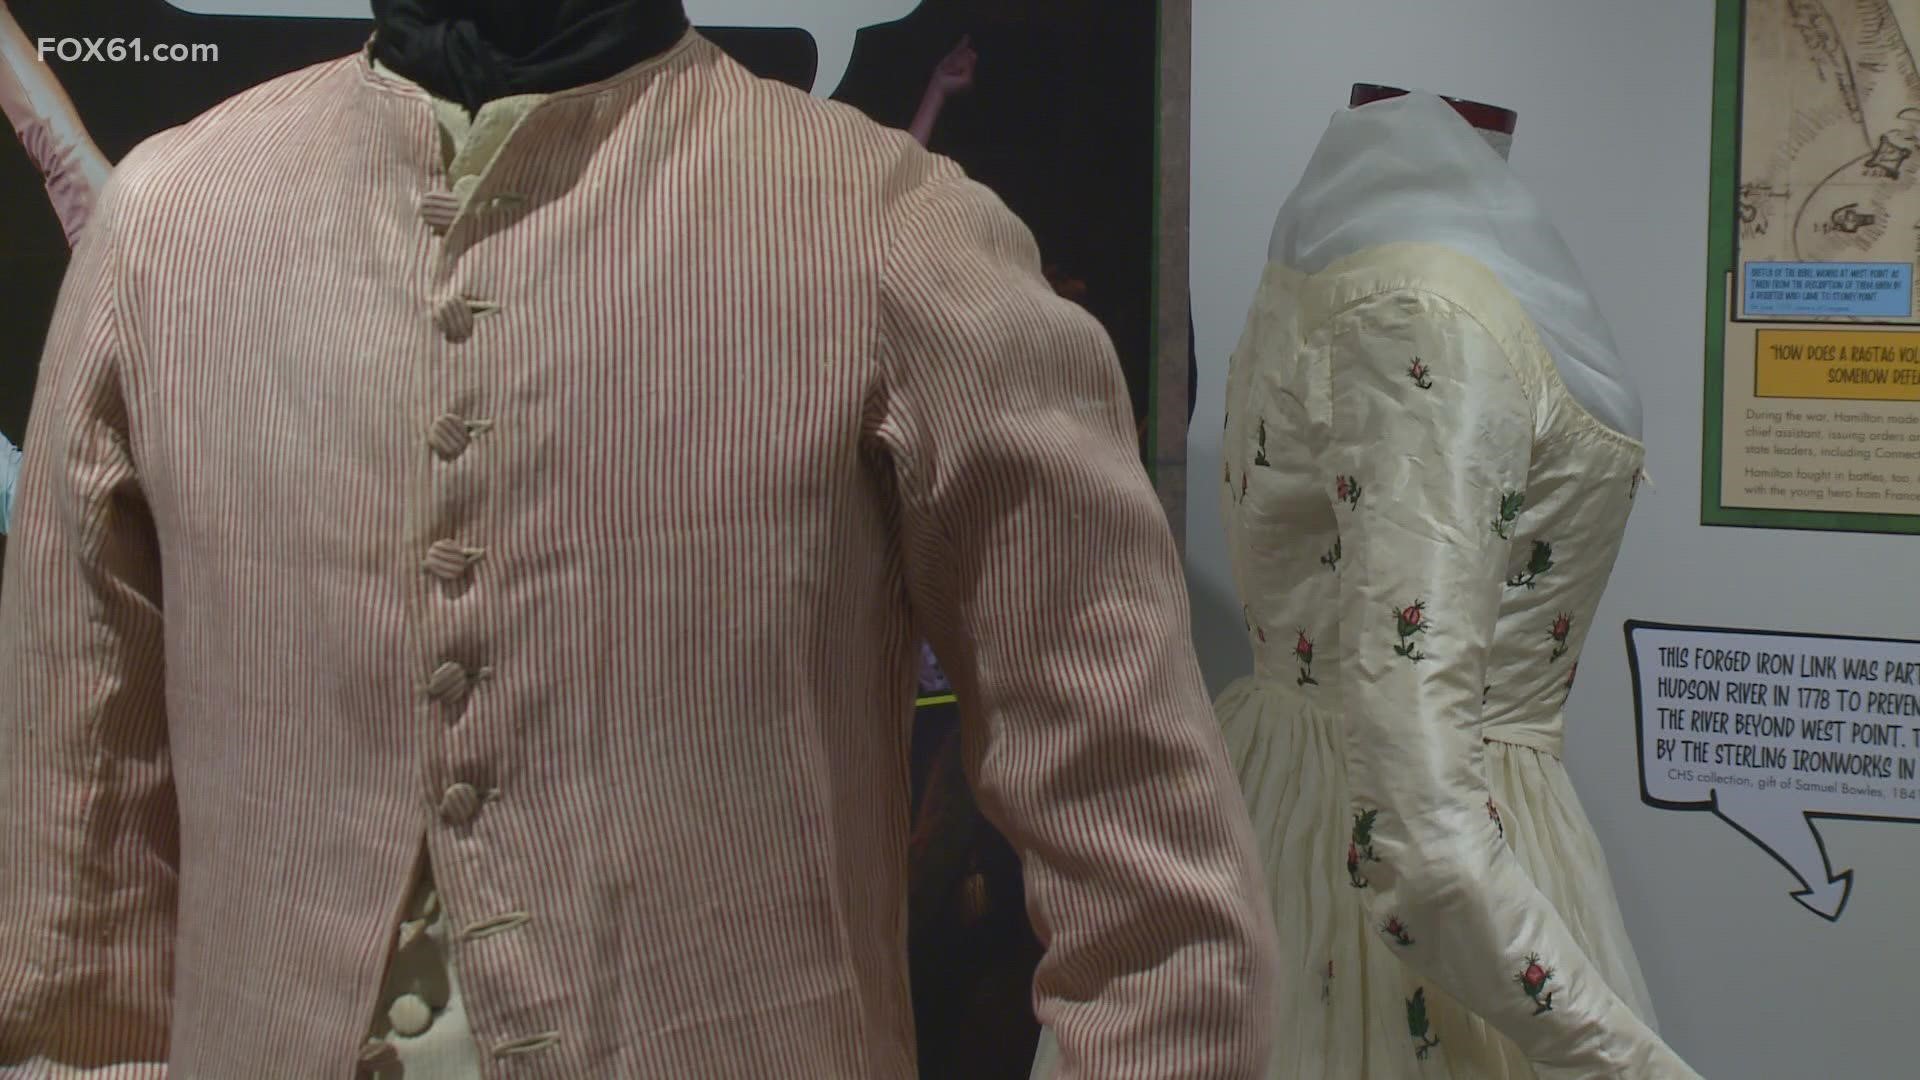 The exhibit features more than a dozen artifacts related to Alexander Hamilton and characters from Lin-Manuel Miranda’s musical.